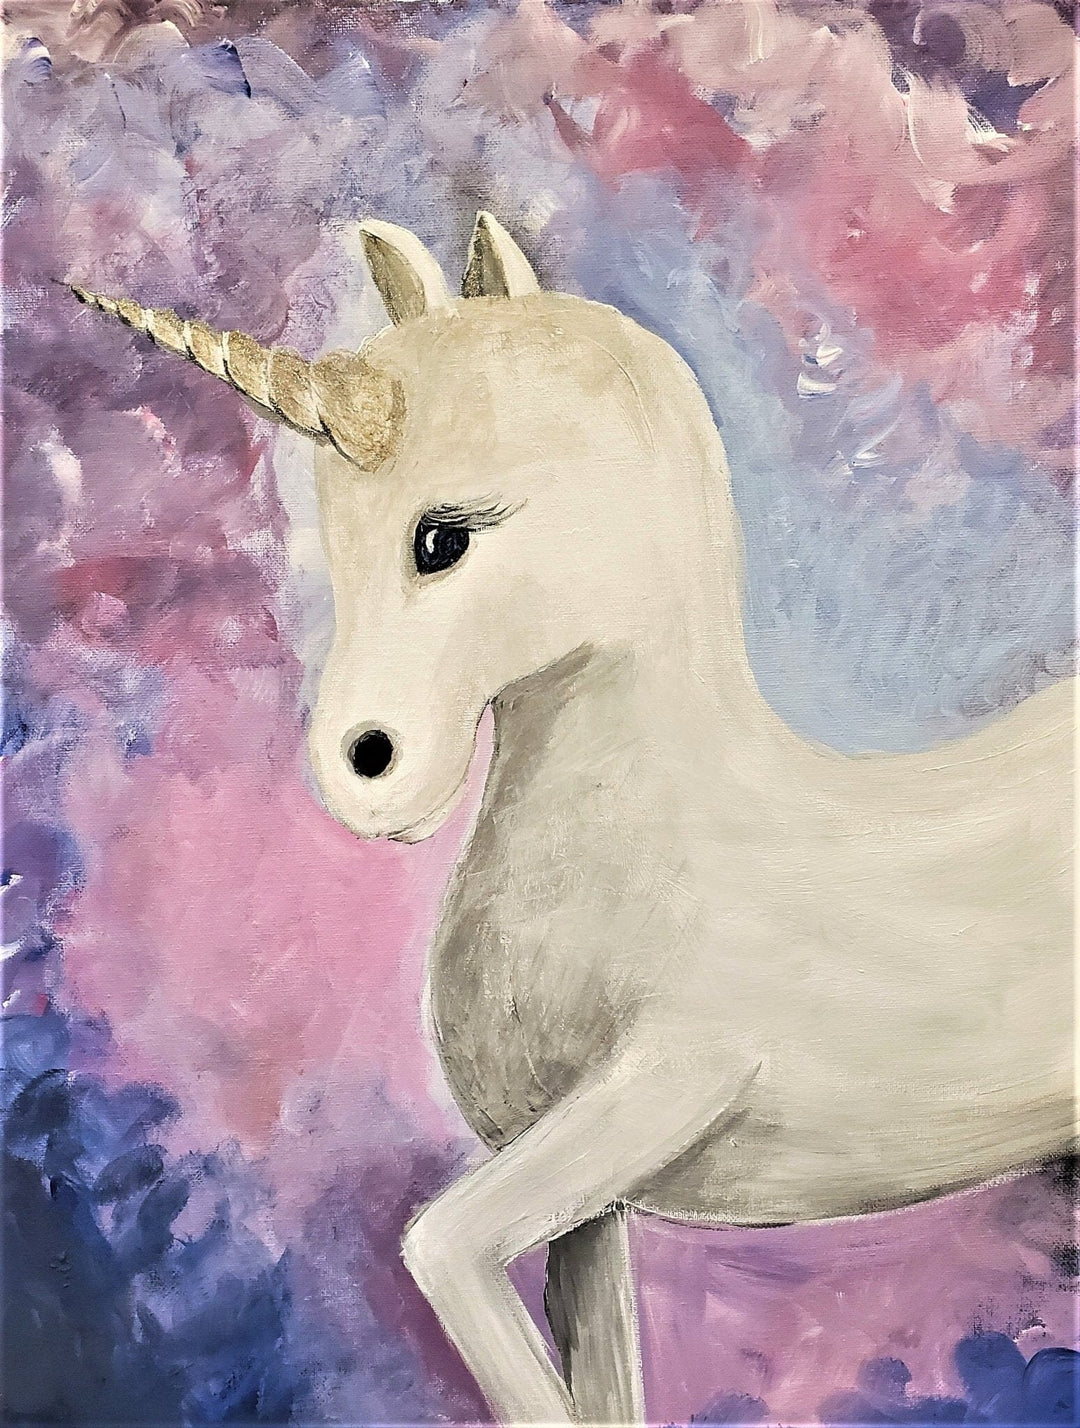 20x16  Acrylic Painting of a Unicorn Colt in the Purple Mist-Limited edition - Acrylic Painting - Alexa Martha Designs   